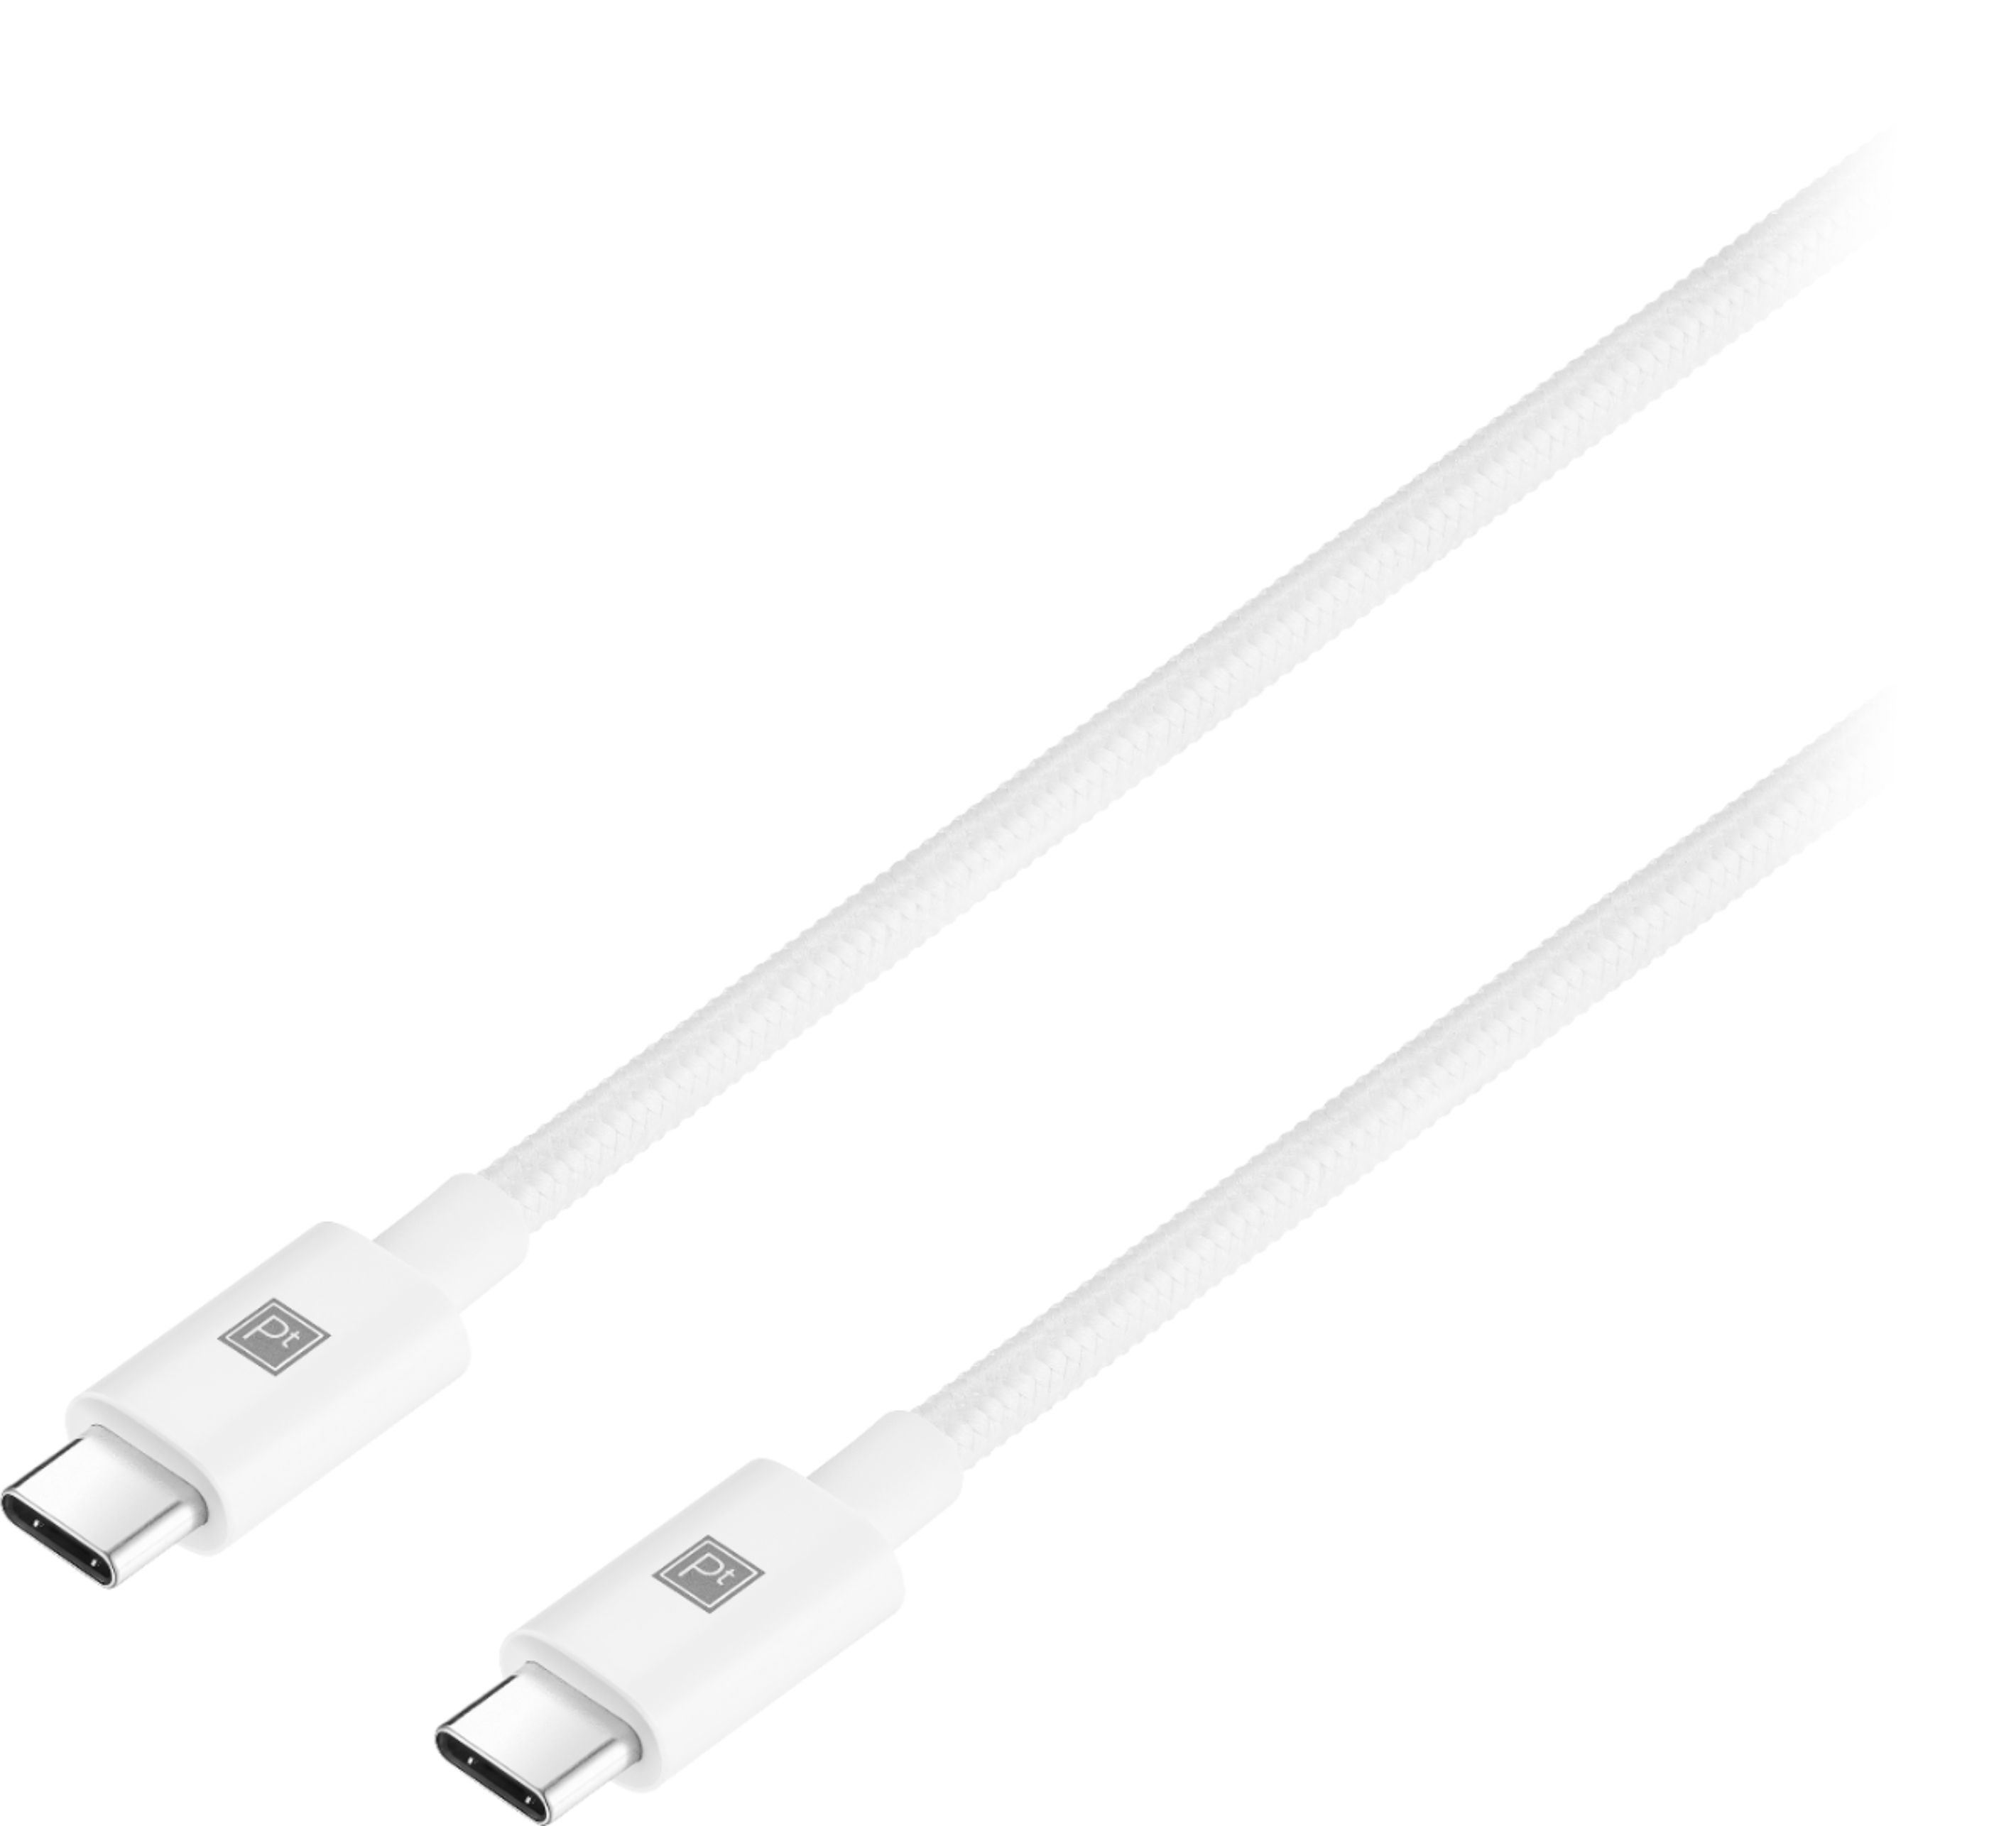 Cablelinx Elite USB Type-C to USB Type-C Braided Cable (36, White)